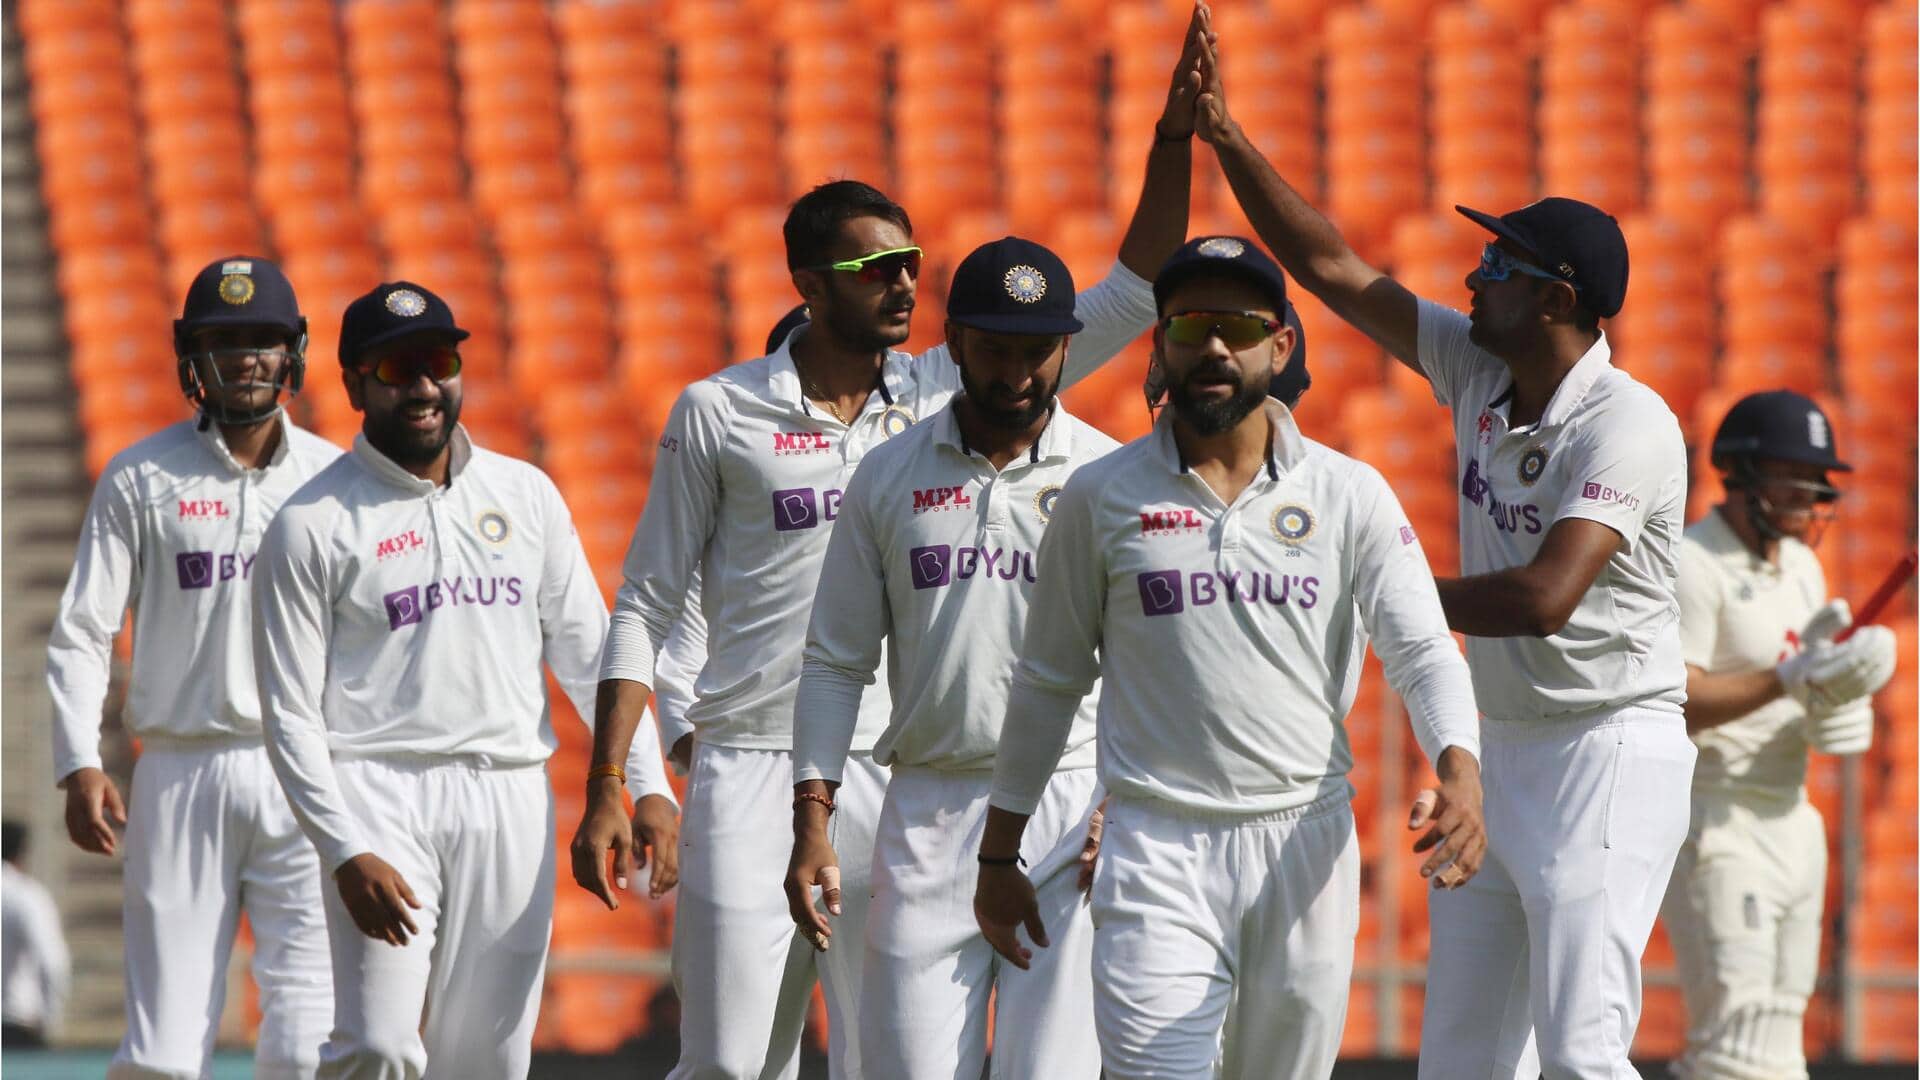 Key takeaways from India's Test squad versus South Africa